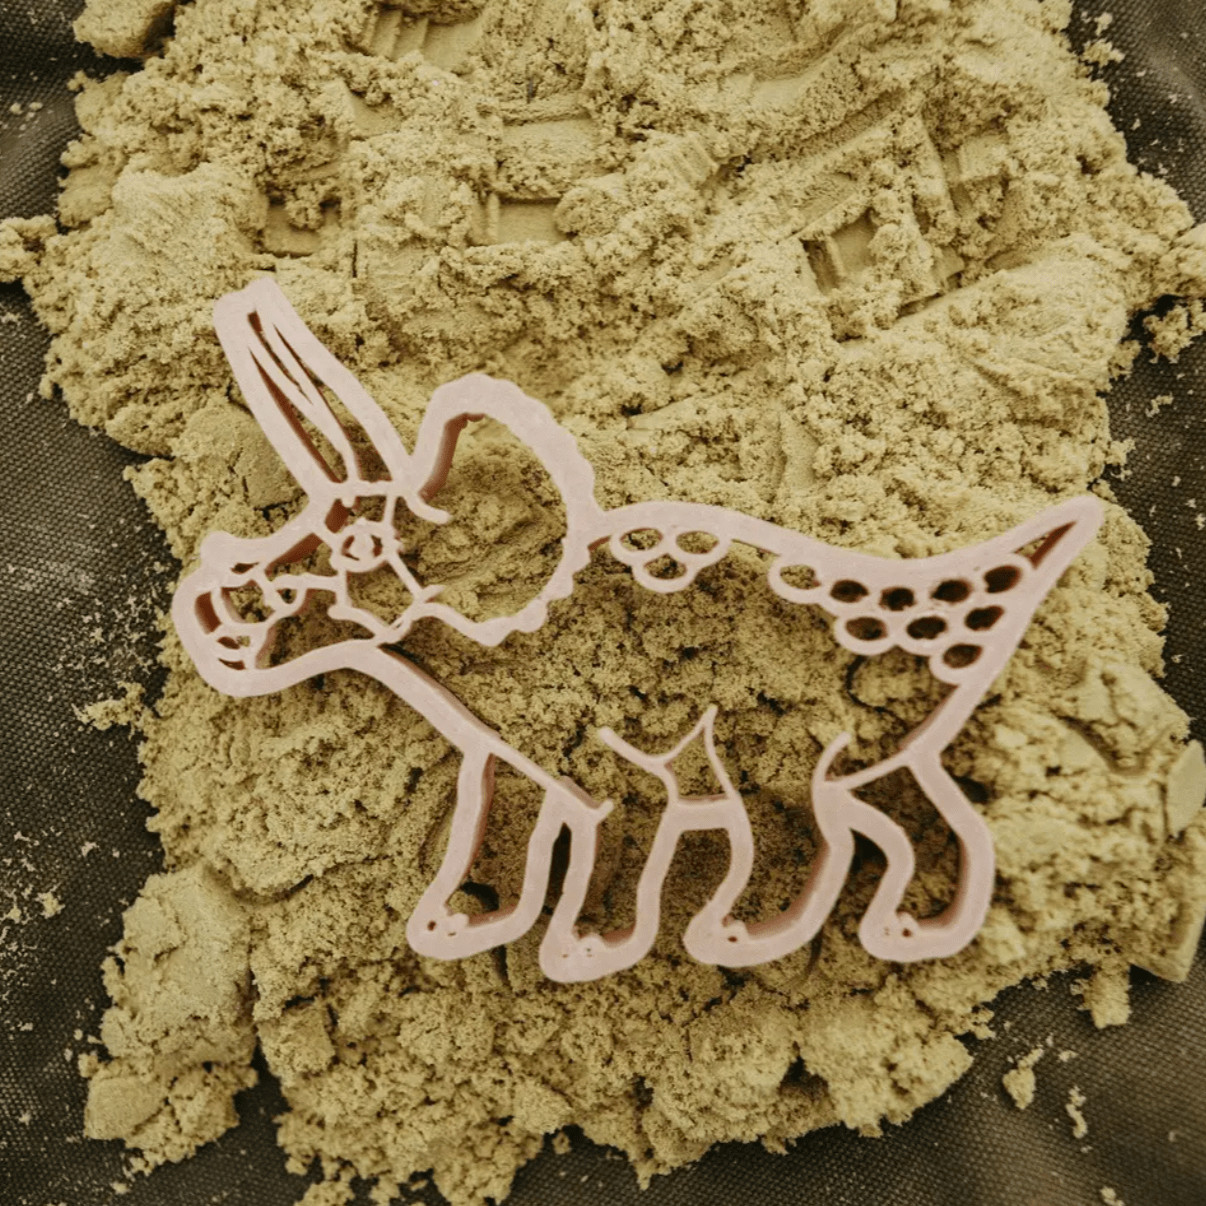 Kinfolk Pantry Sensory Play Large Triceratops Dinosaur Eco Cutter (Biodegradable Play Dough Cutter)